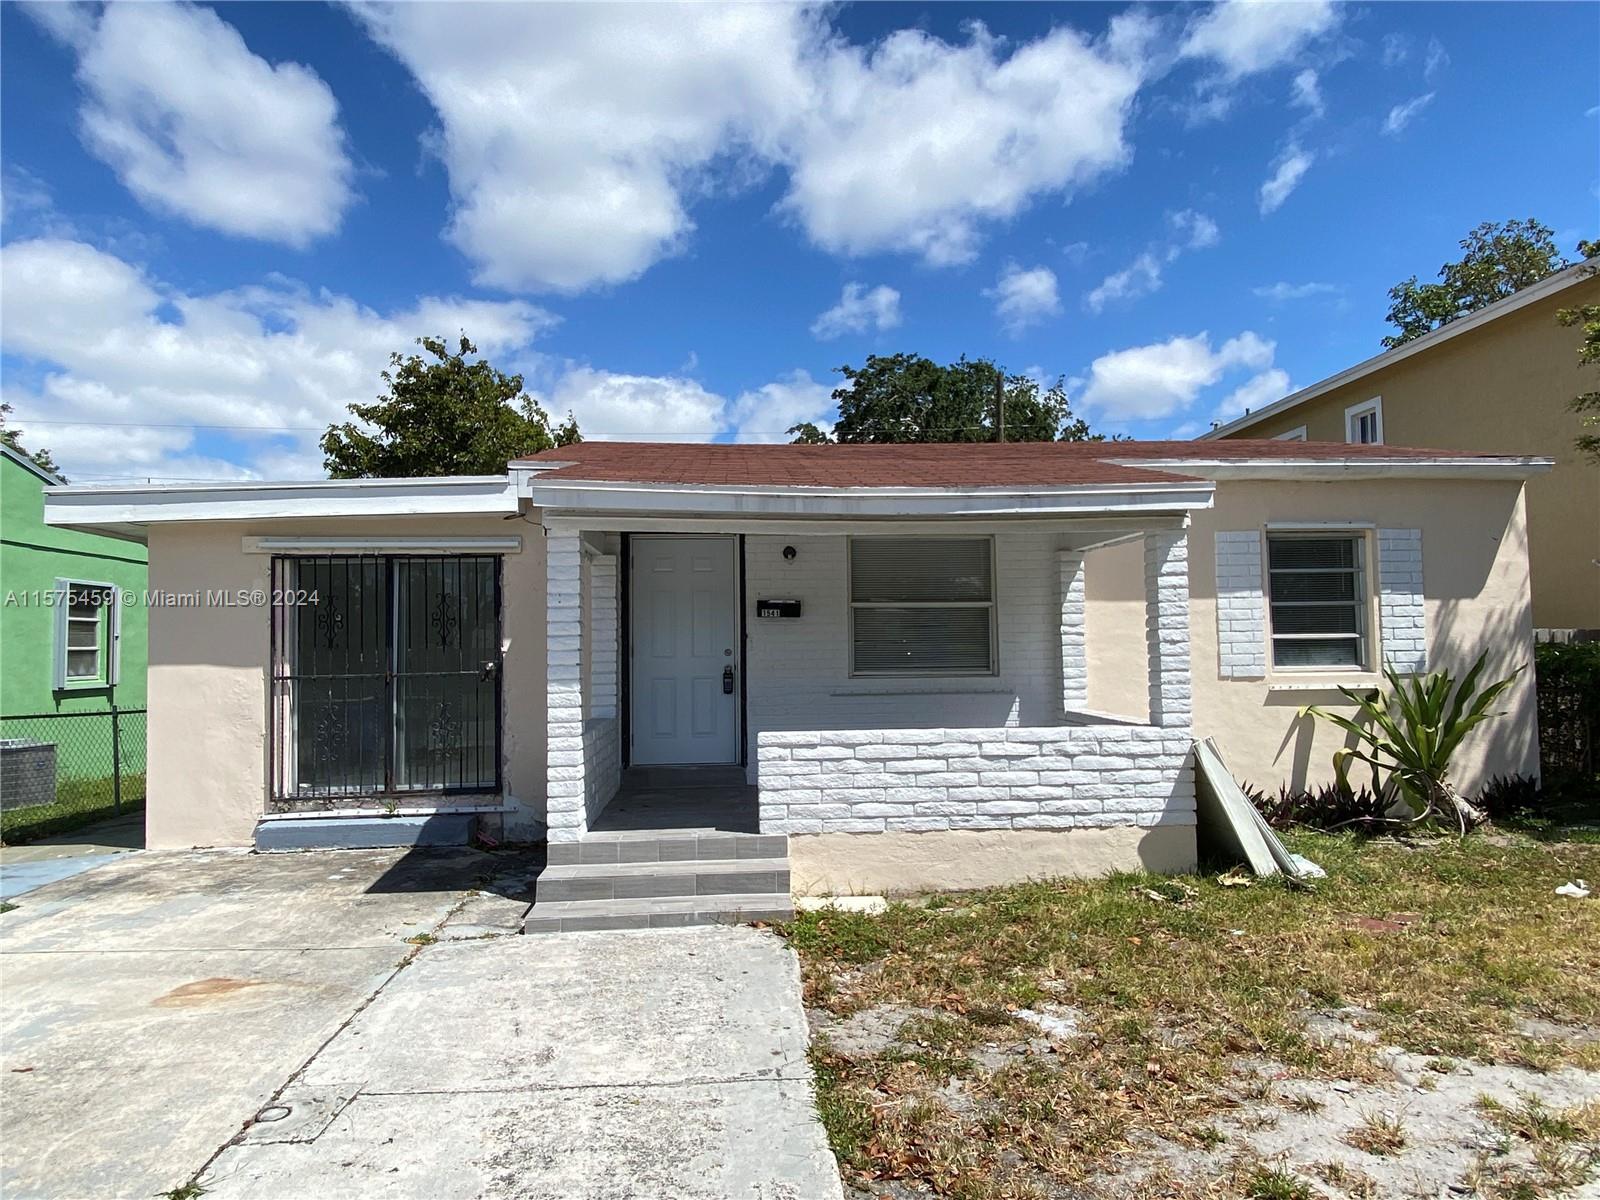 Photo of 1541 NW 55th Ter #1 in Miami, FL